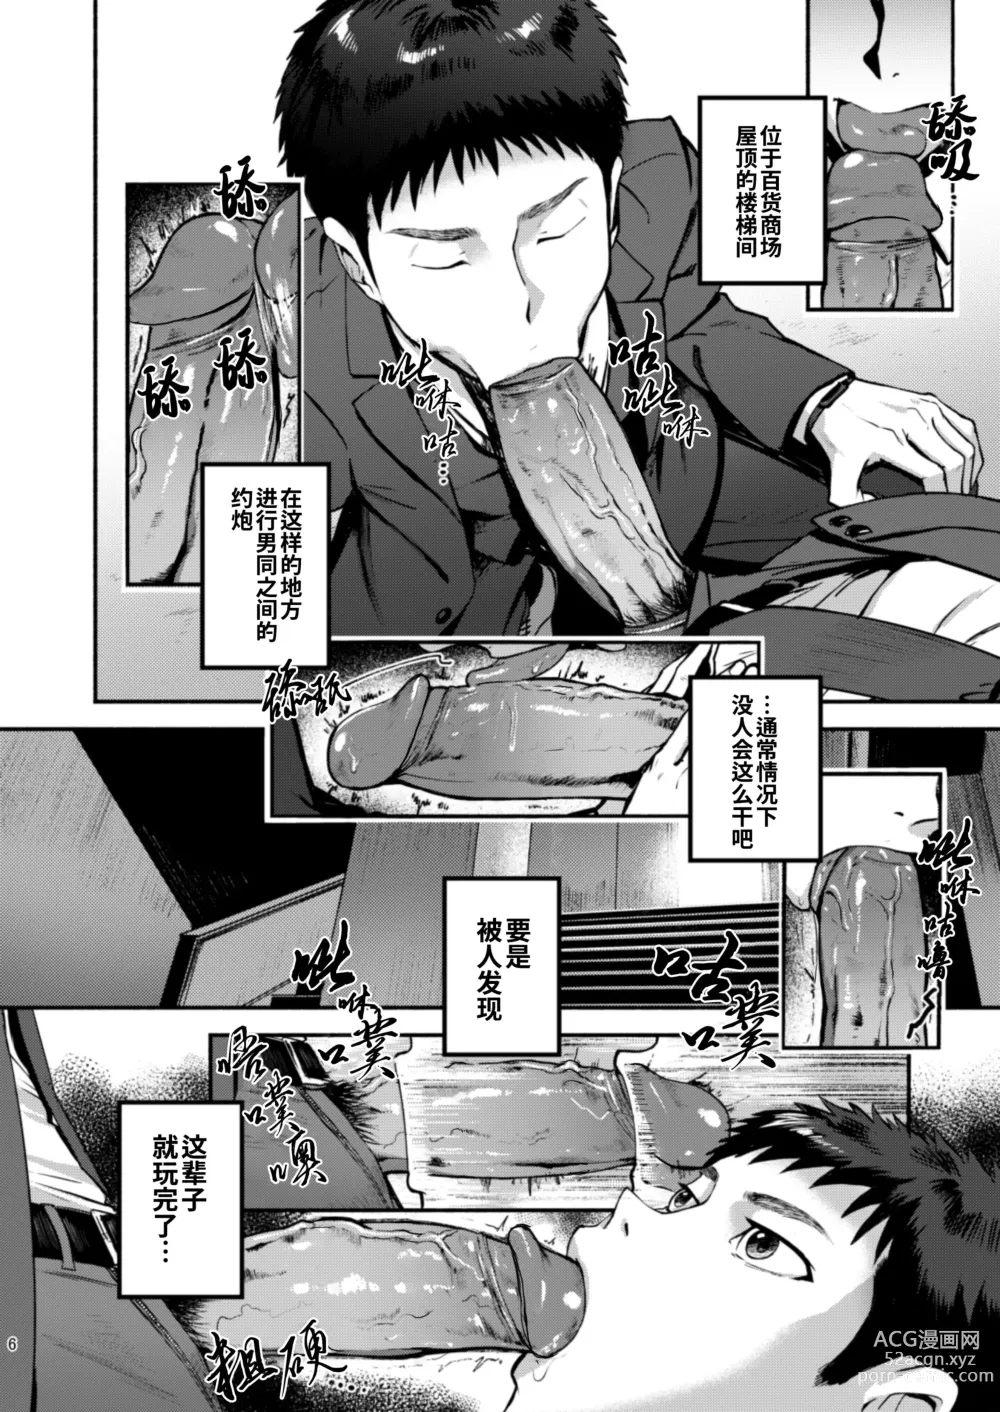 Page 7 of doujinshi 极限 第1卷 (decensored)